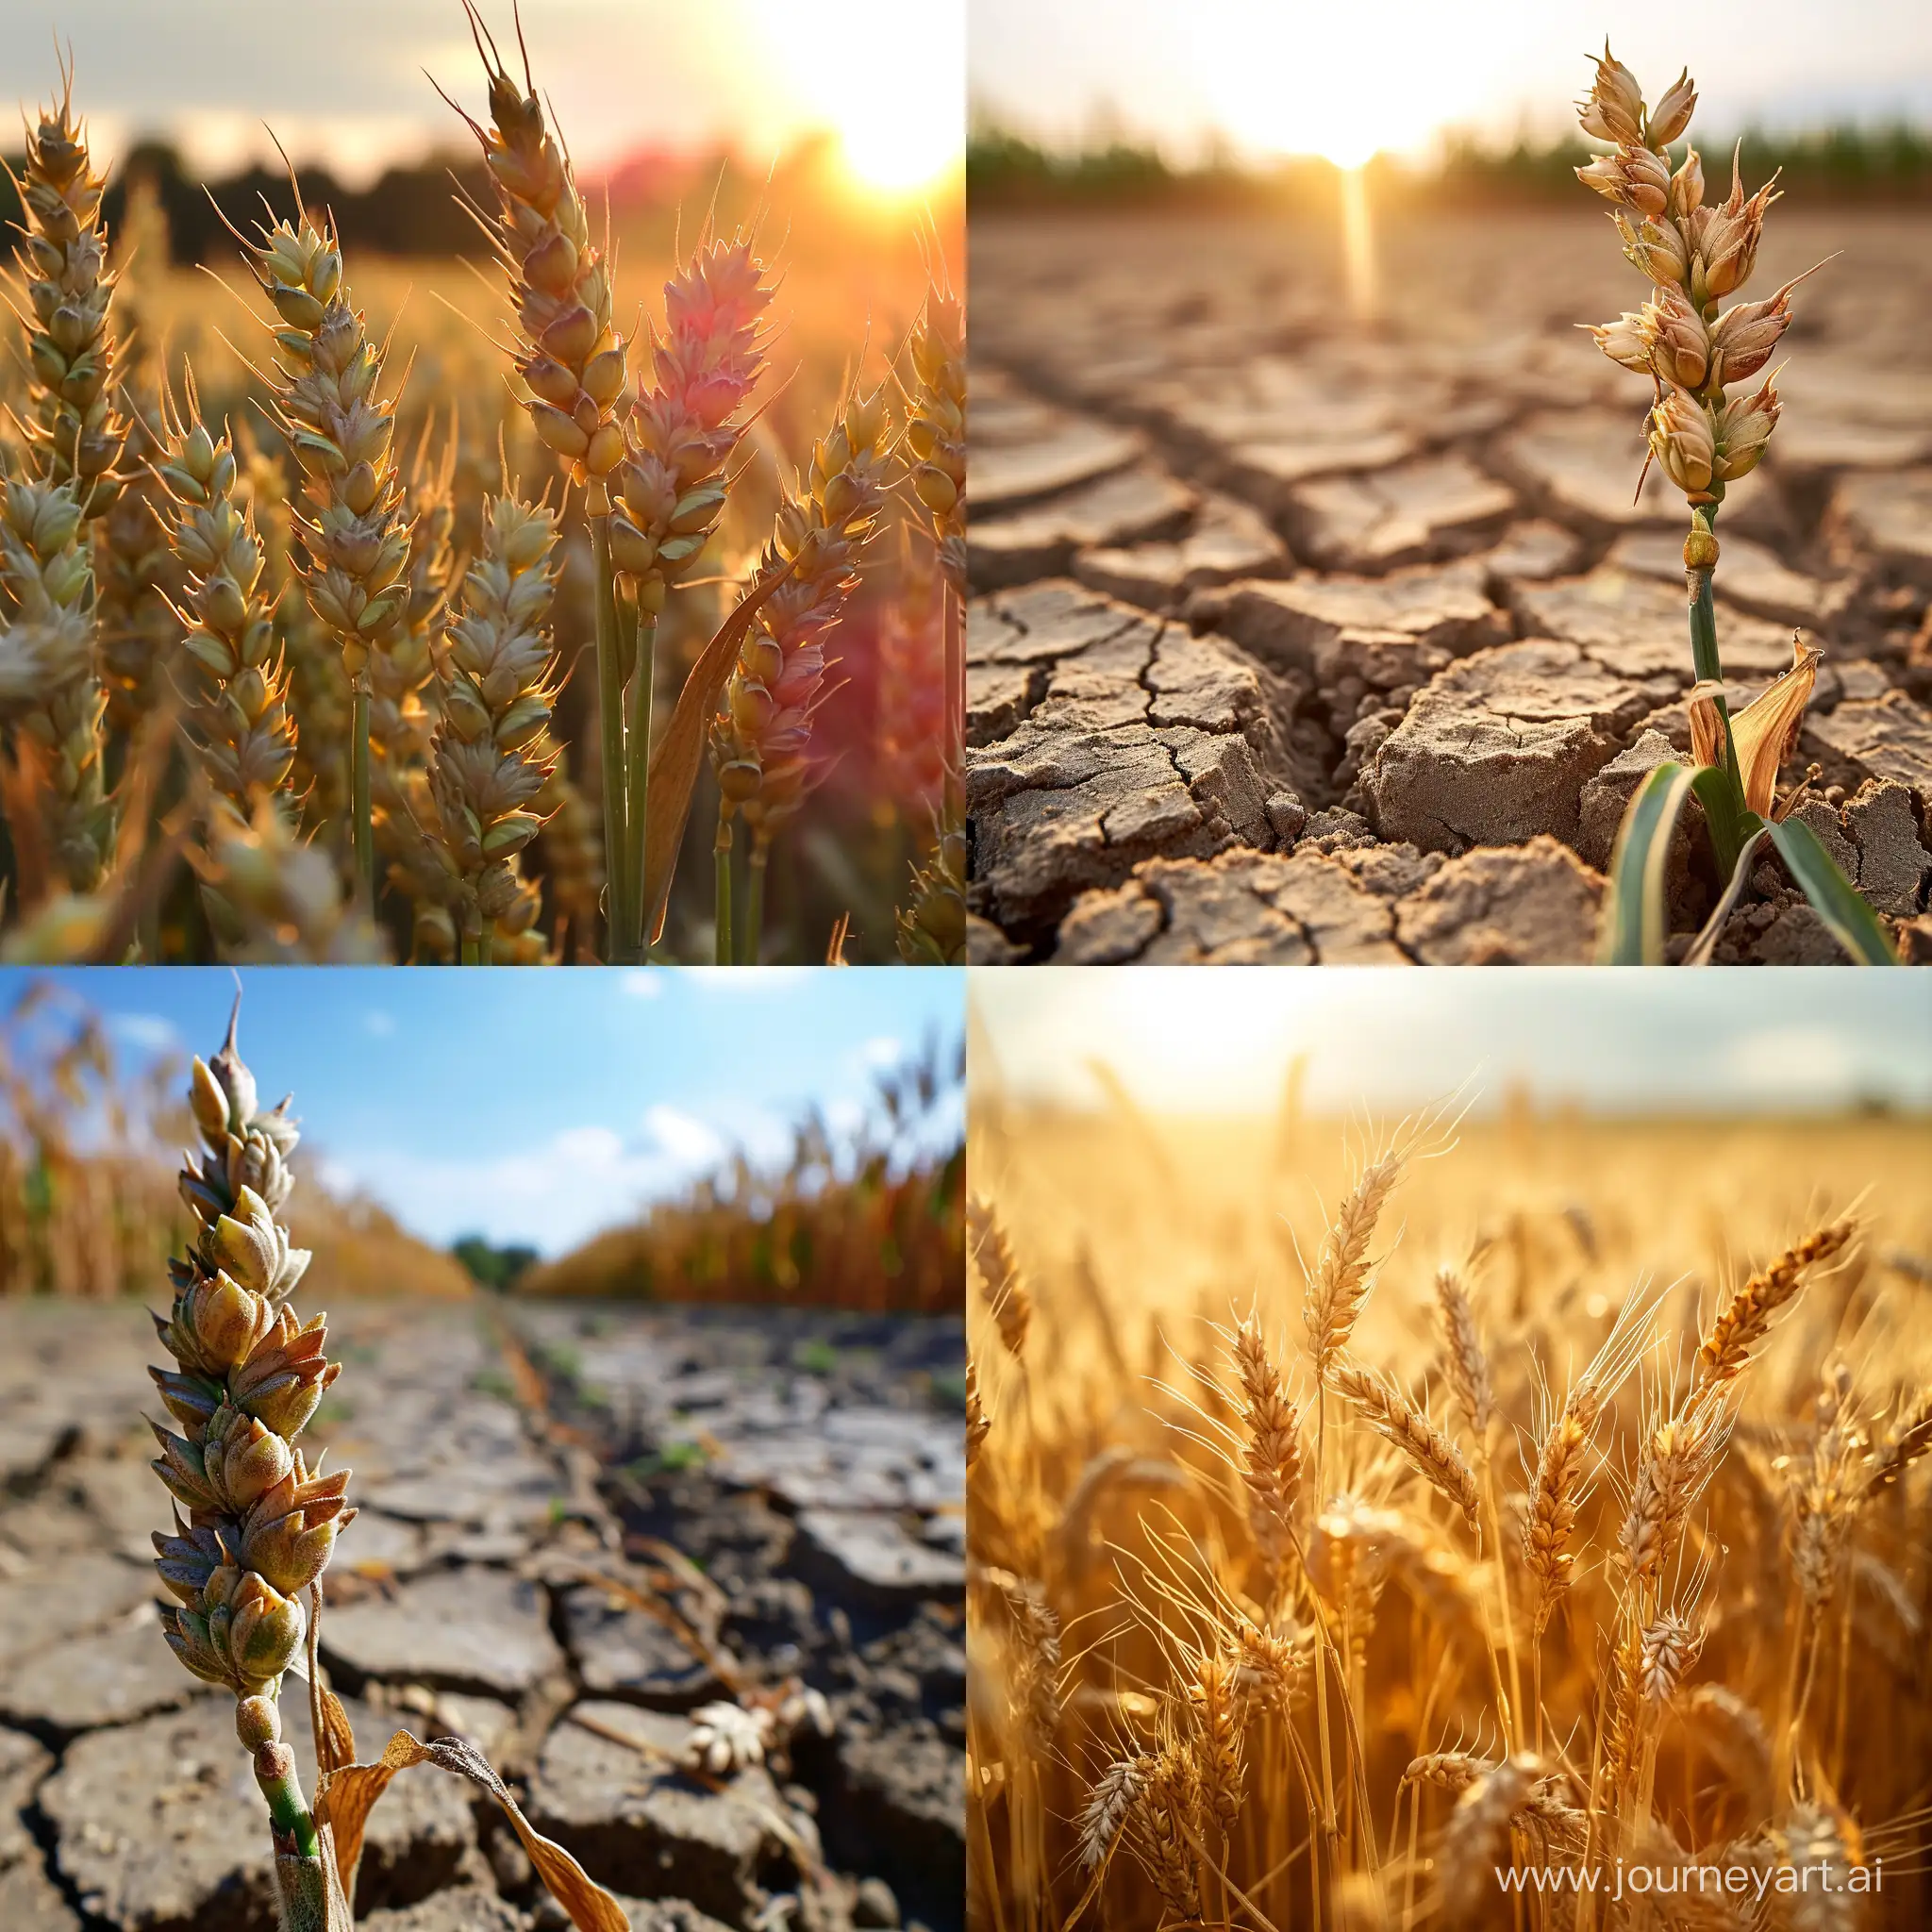 Climate change affecting agriculture and wheat crops in the future